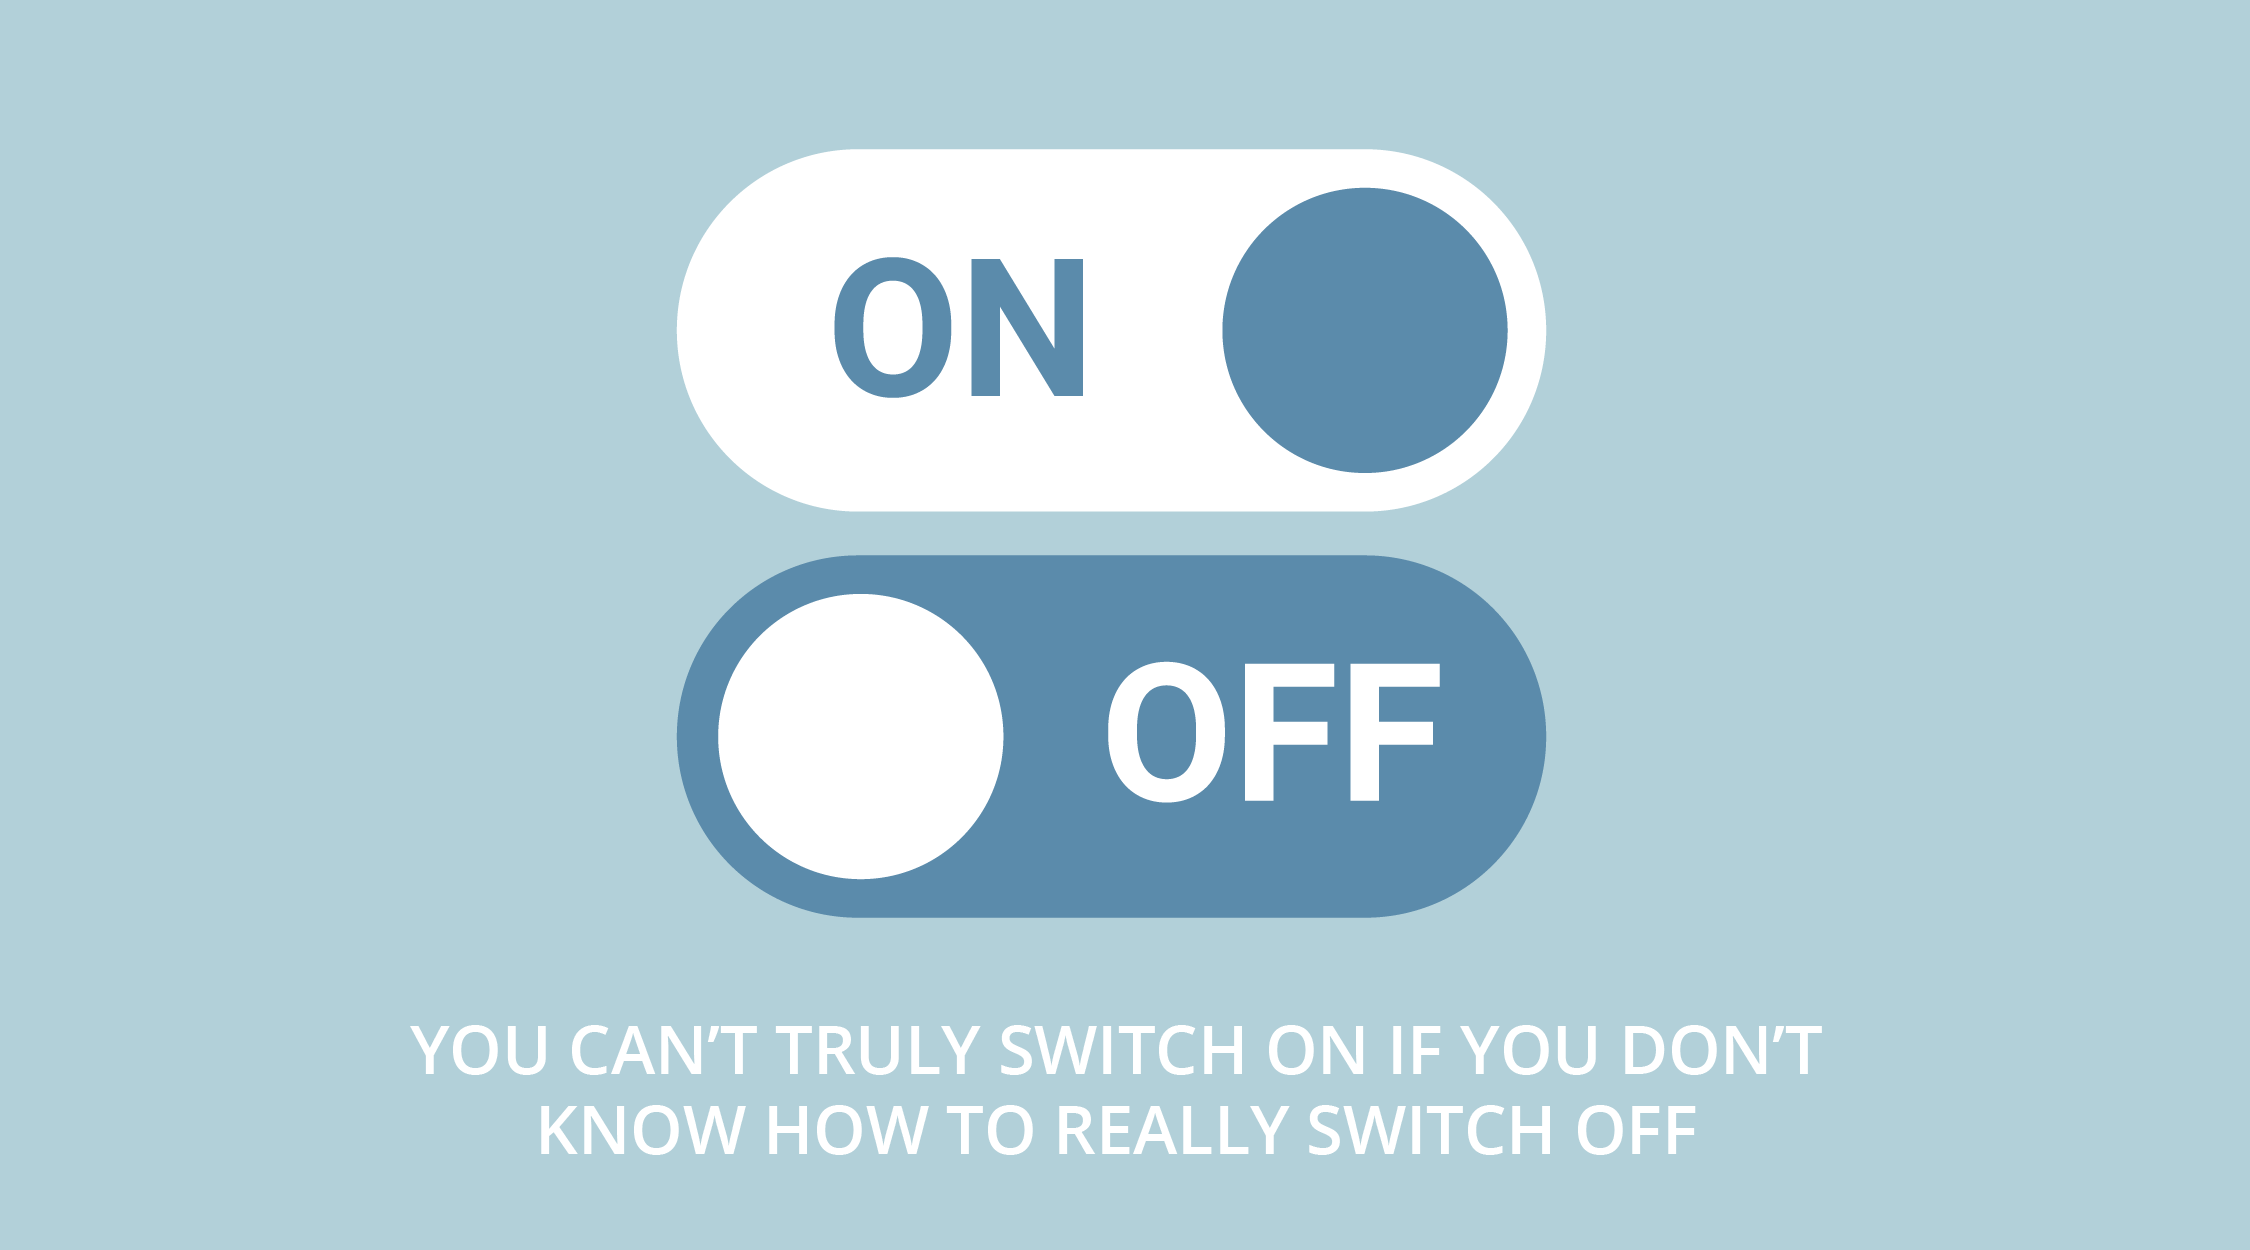 Switching on and off